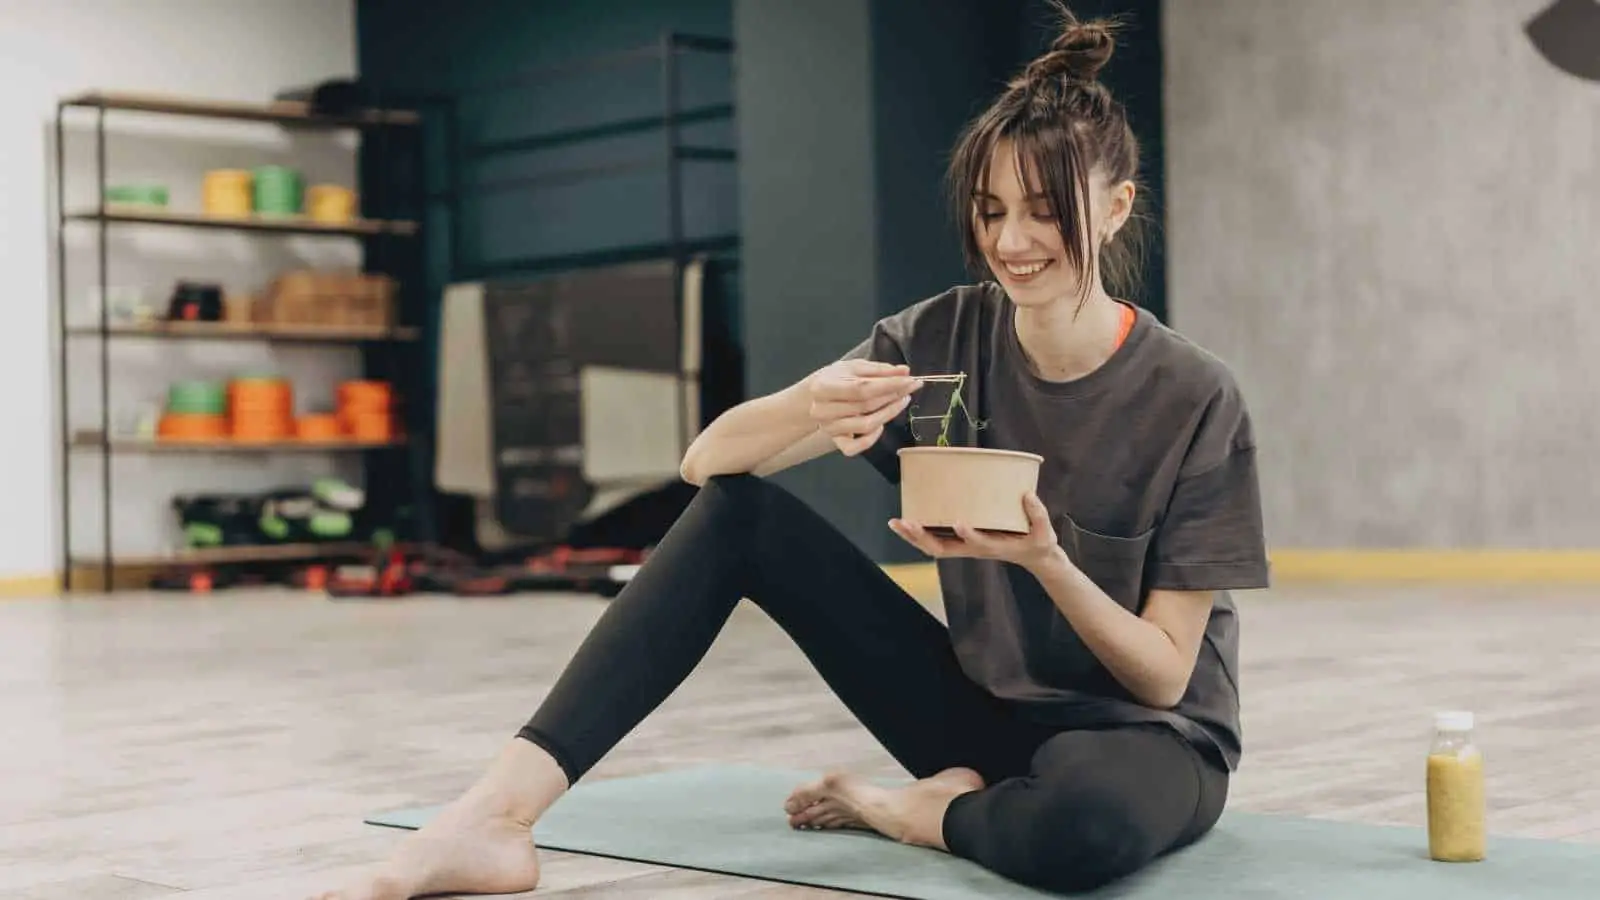 Can You Eat Immediately After Doing Yoga?